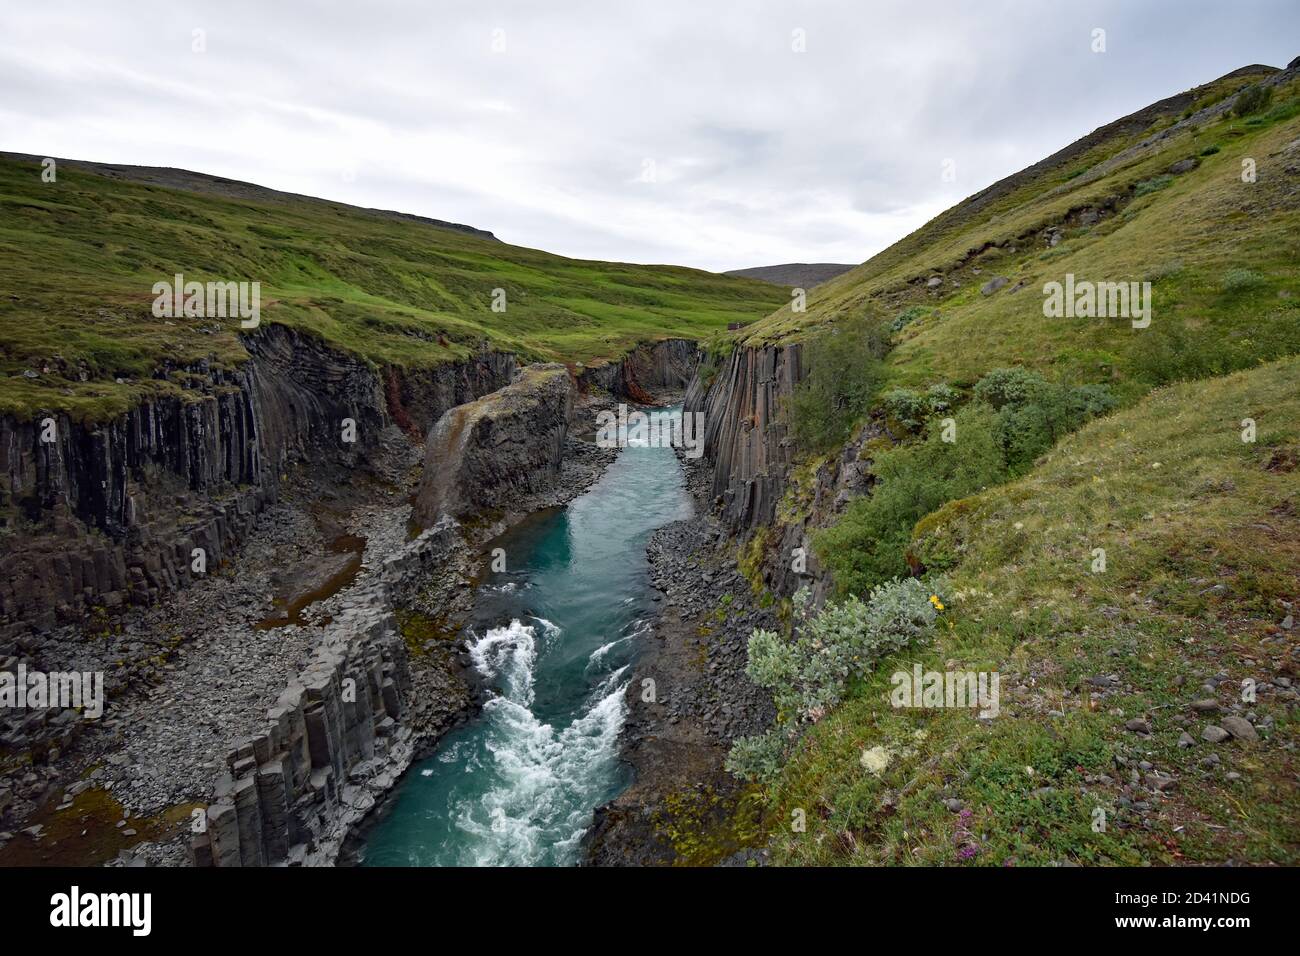 The blue, green Jokla River cuts through the Studlagil canyon and passes by the hexagonal basalt columns caused by lava flows in Northeast Iceland. Stock Photo